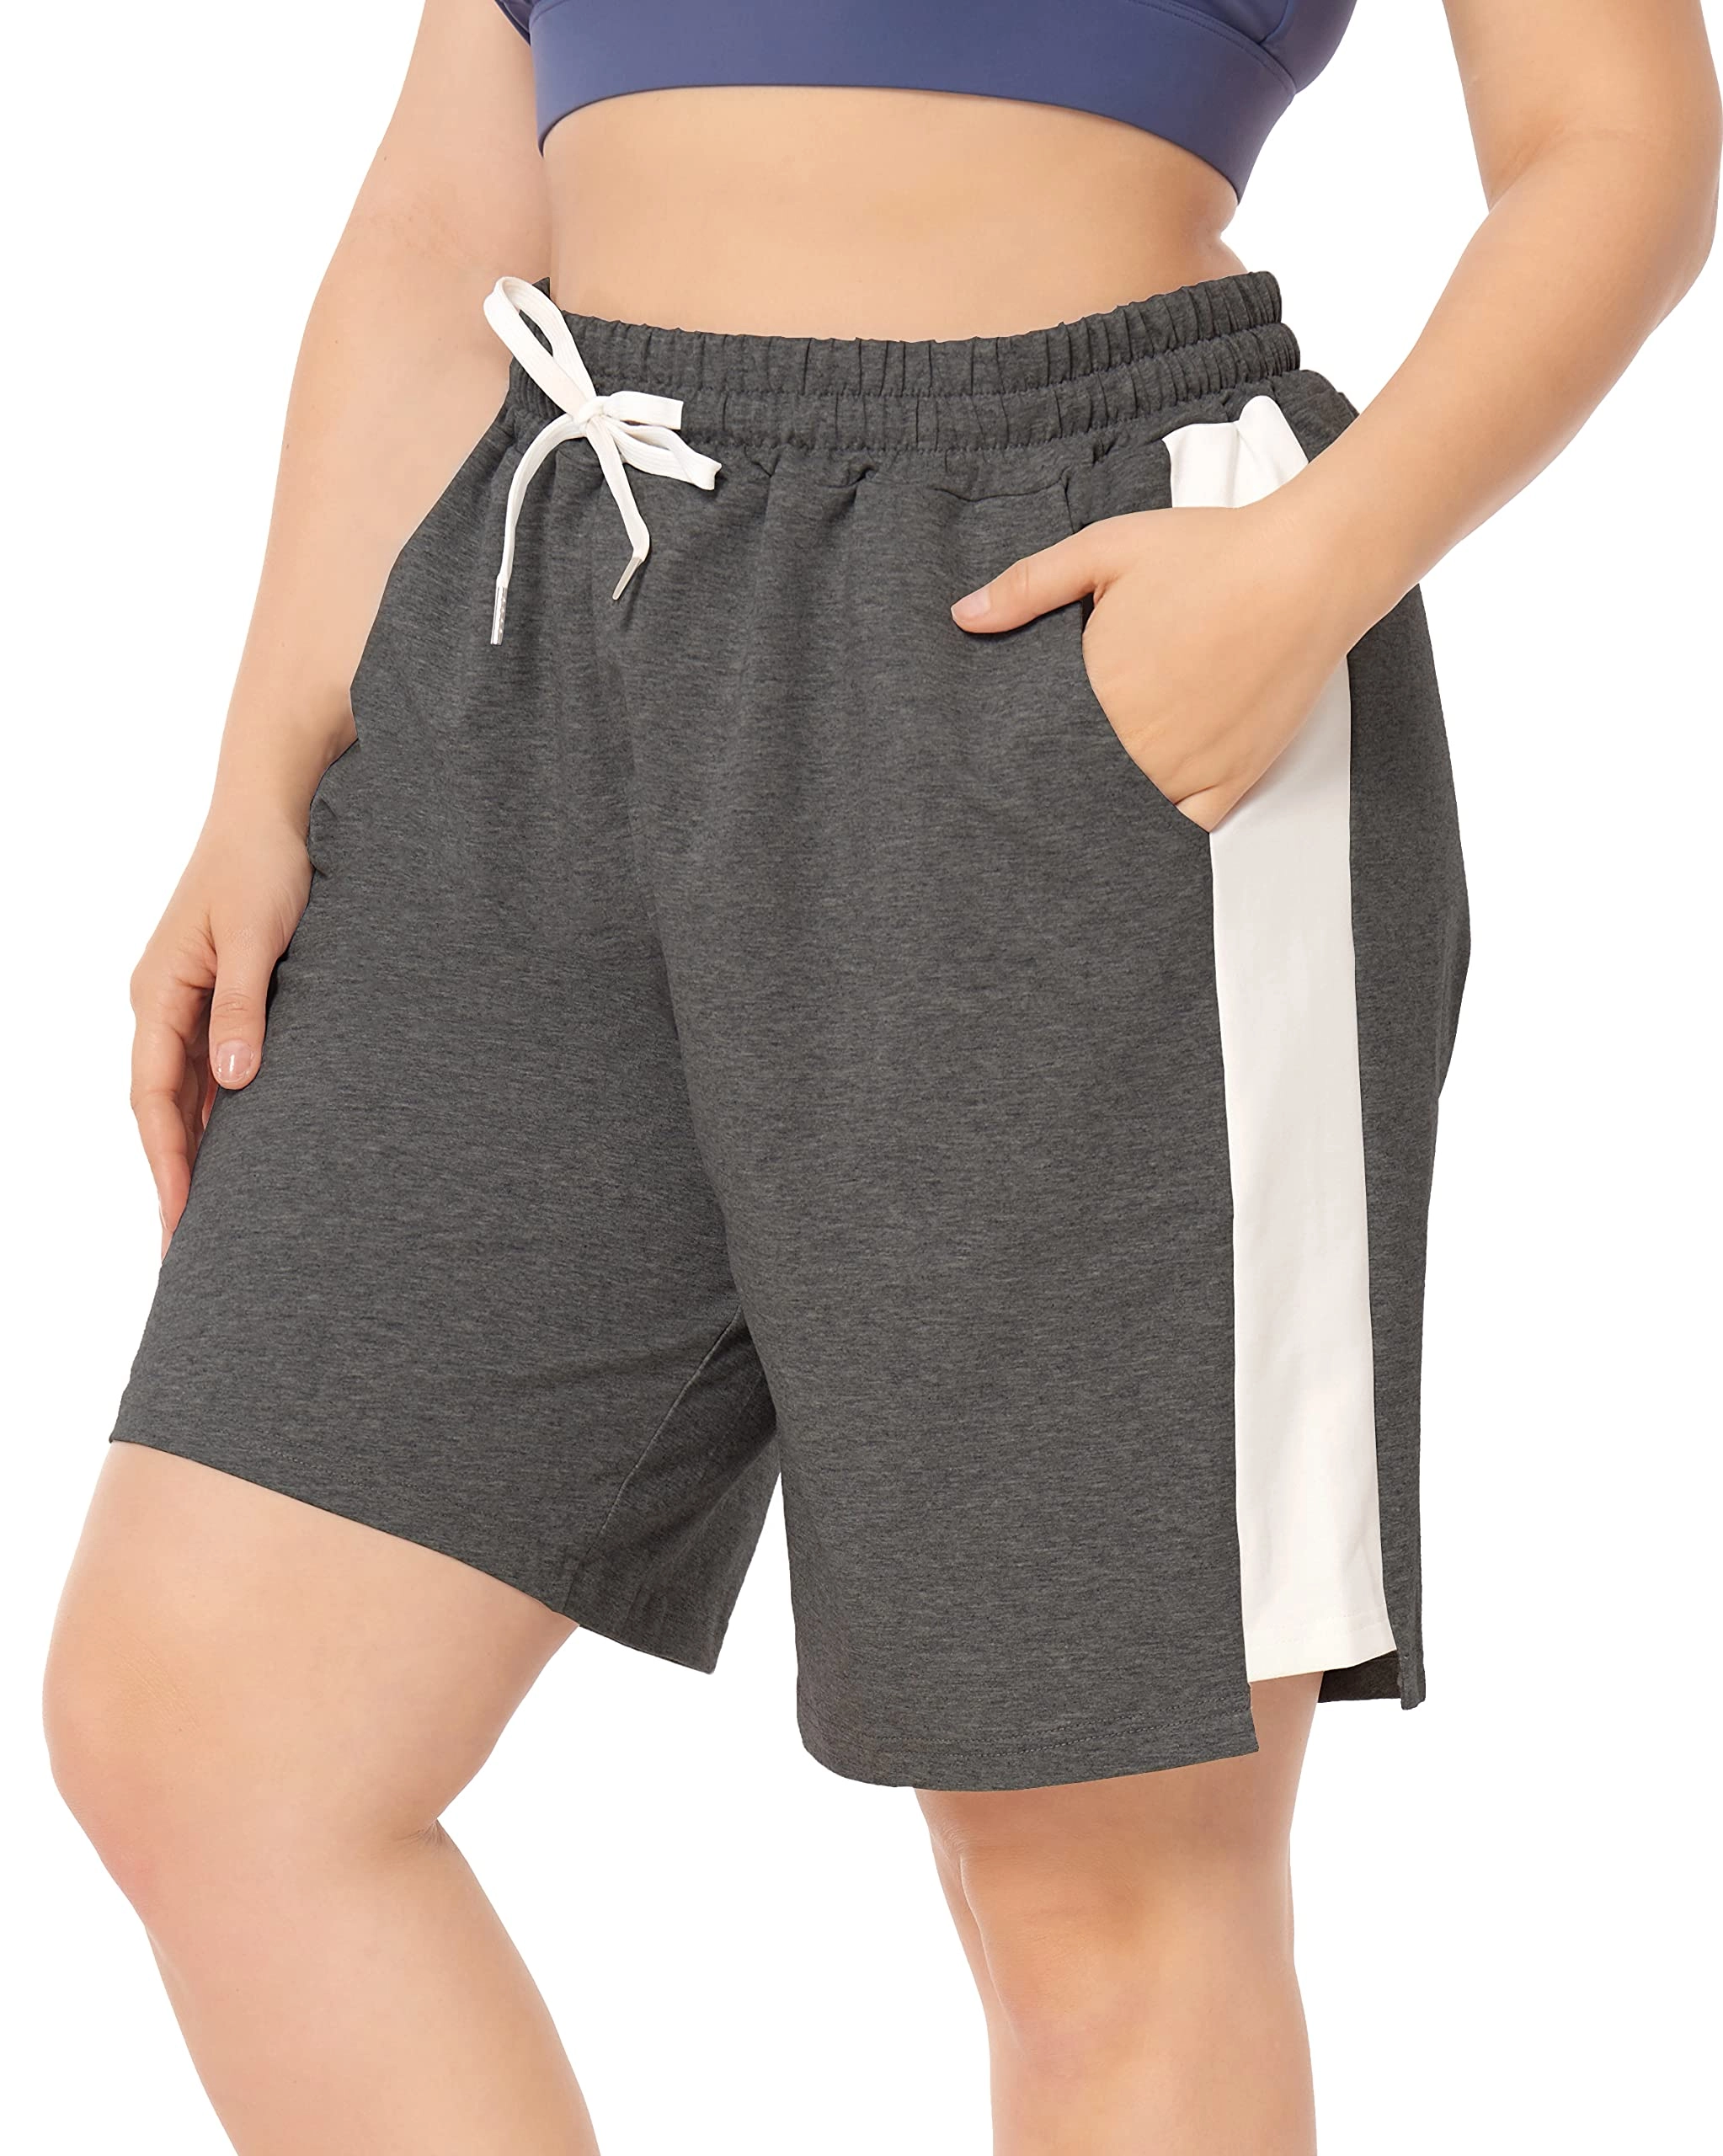 Compression Clothing - Bangladesh Factory, Suppliers, Manufacturers